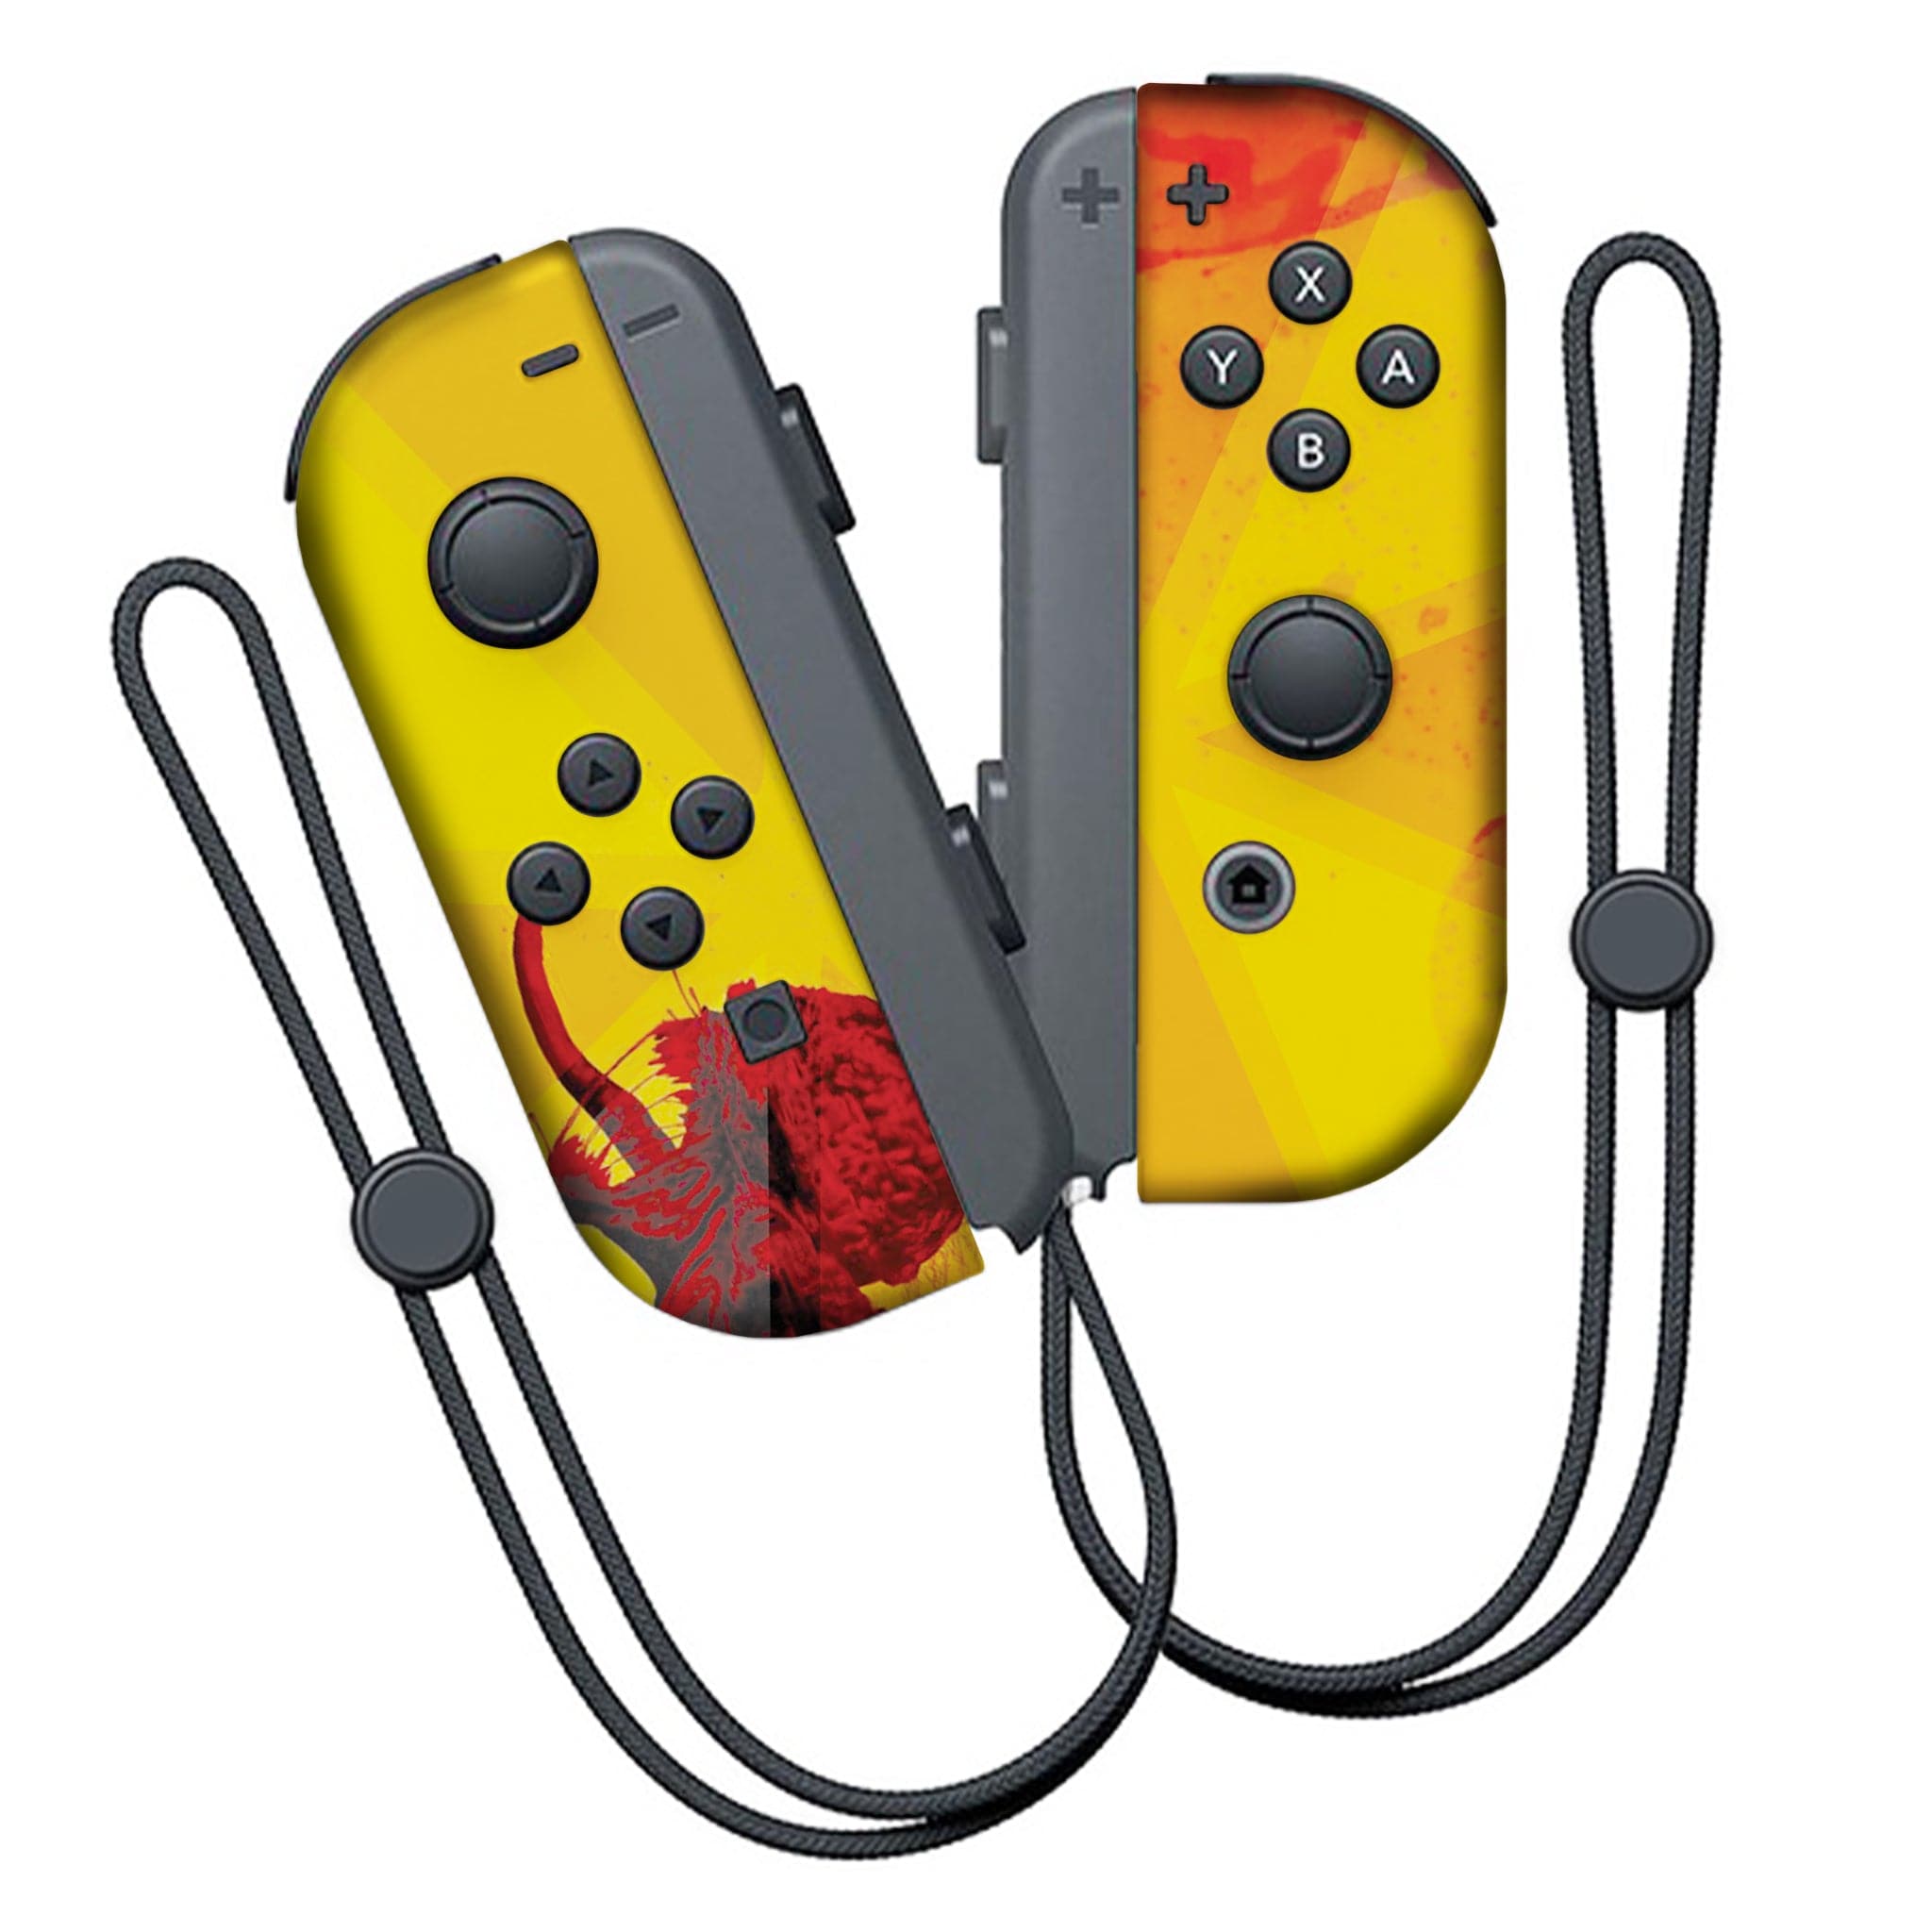 Resident Evil Inspired Nintendo Switch Joy-Con Left and Right Switch Controllers by Nintendo